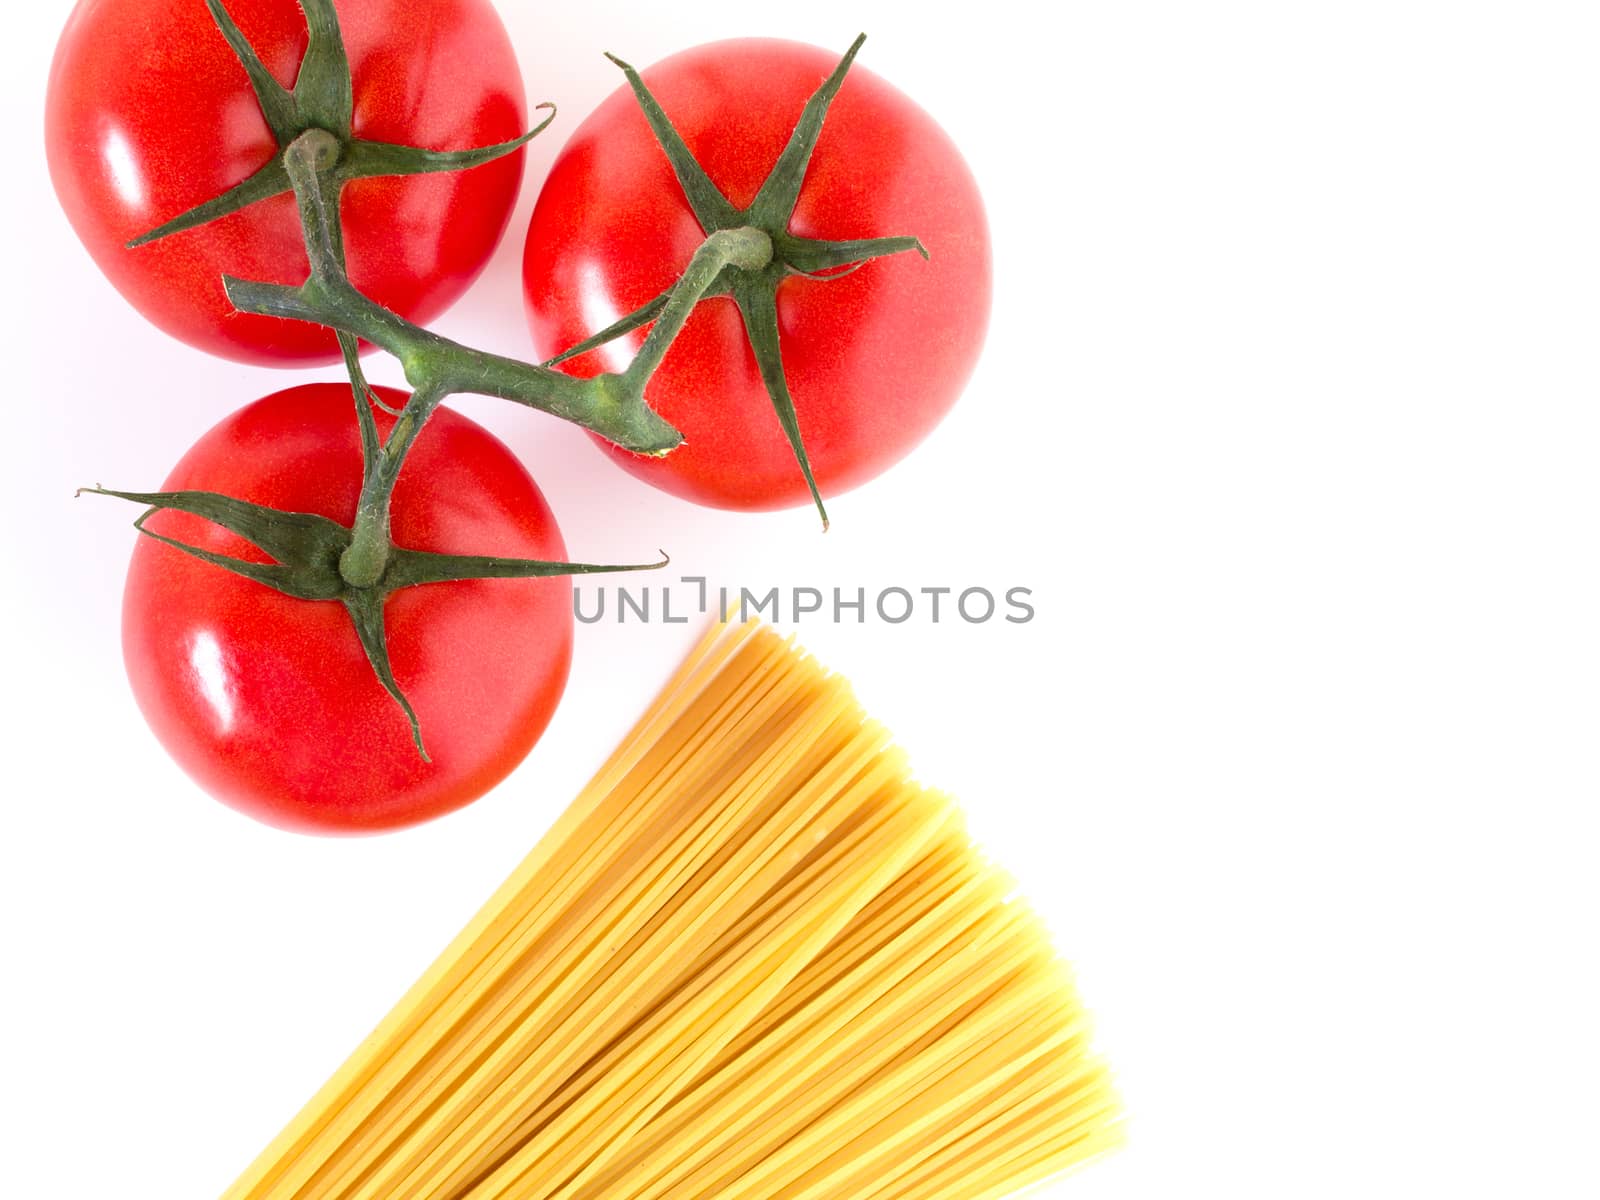 Setting pasta with spaghetti and tomatoes by germanopoli